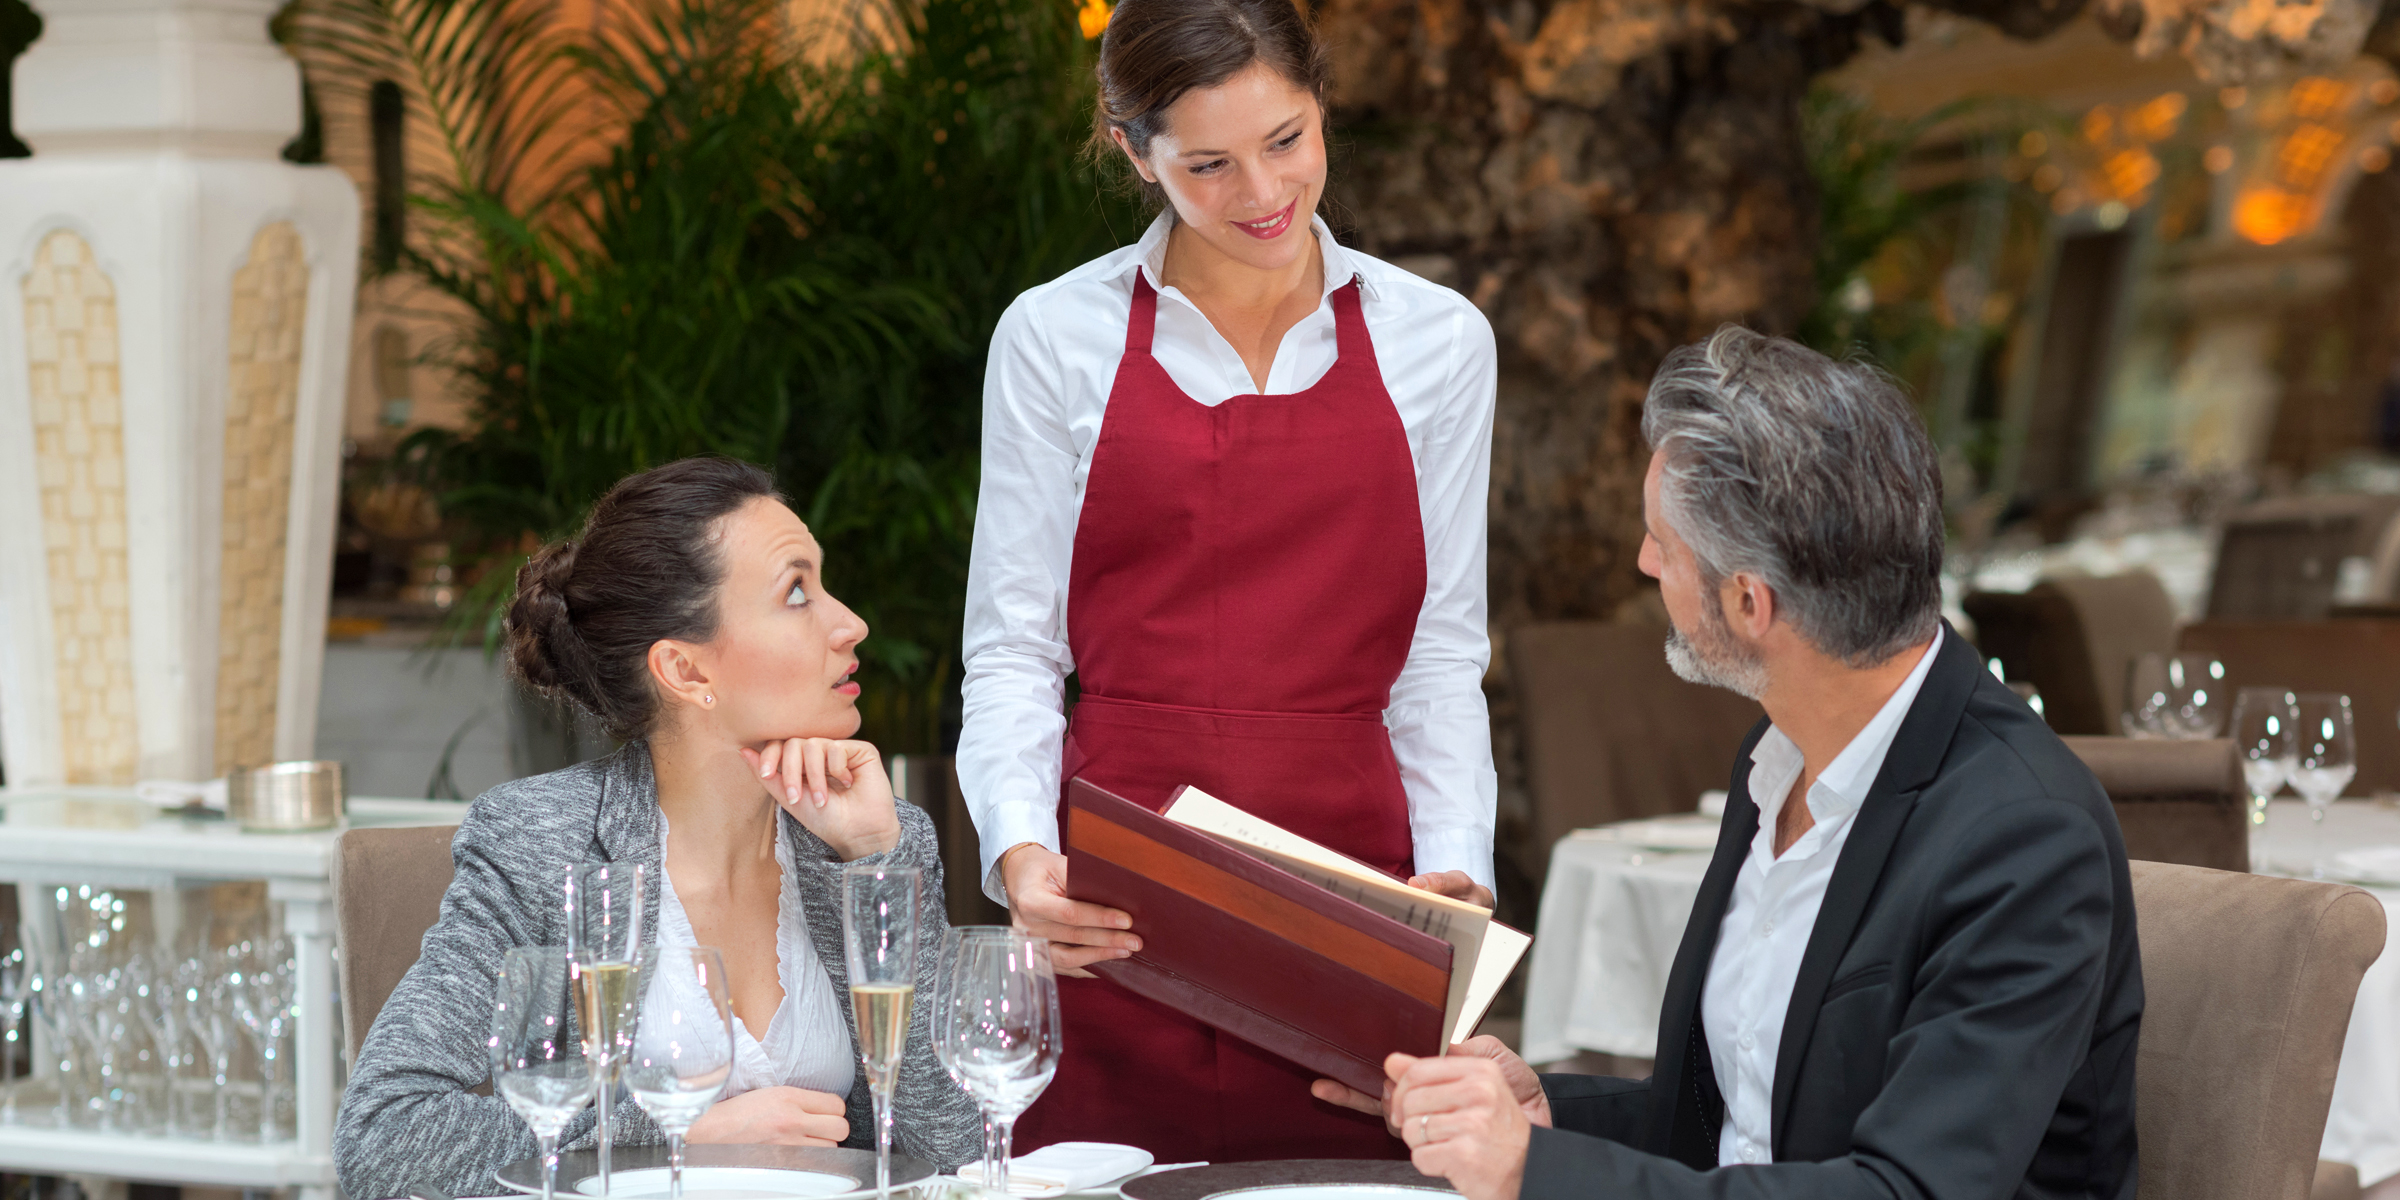 A couple at a restaurant with a waitress | Source: Shutterstock